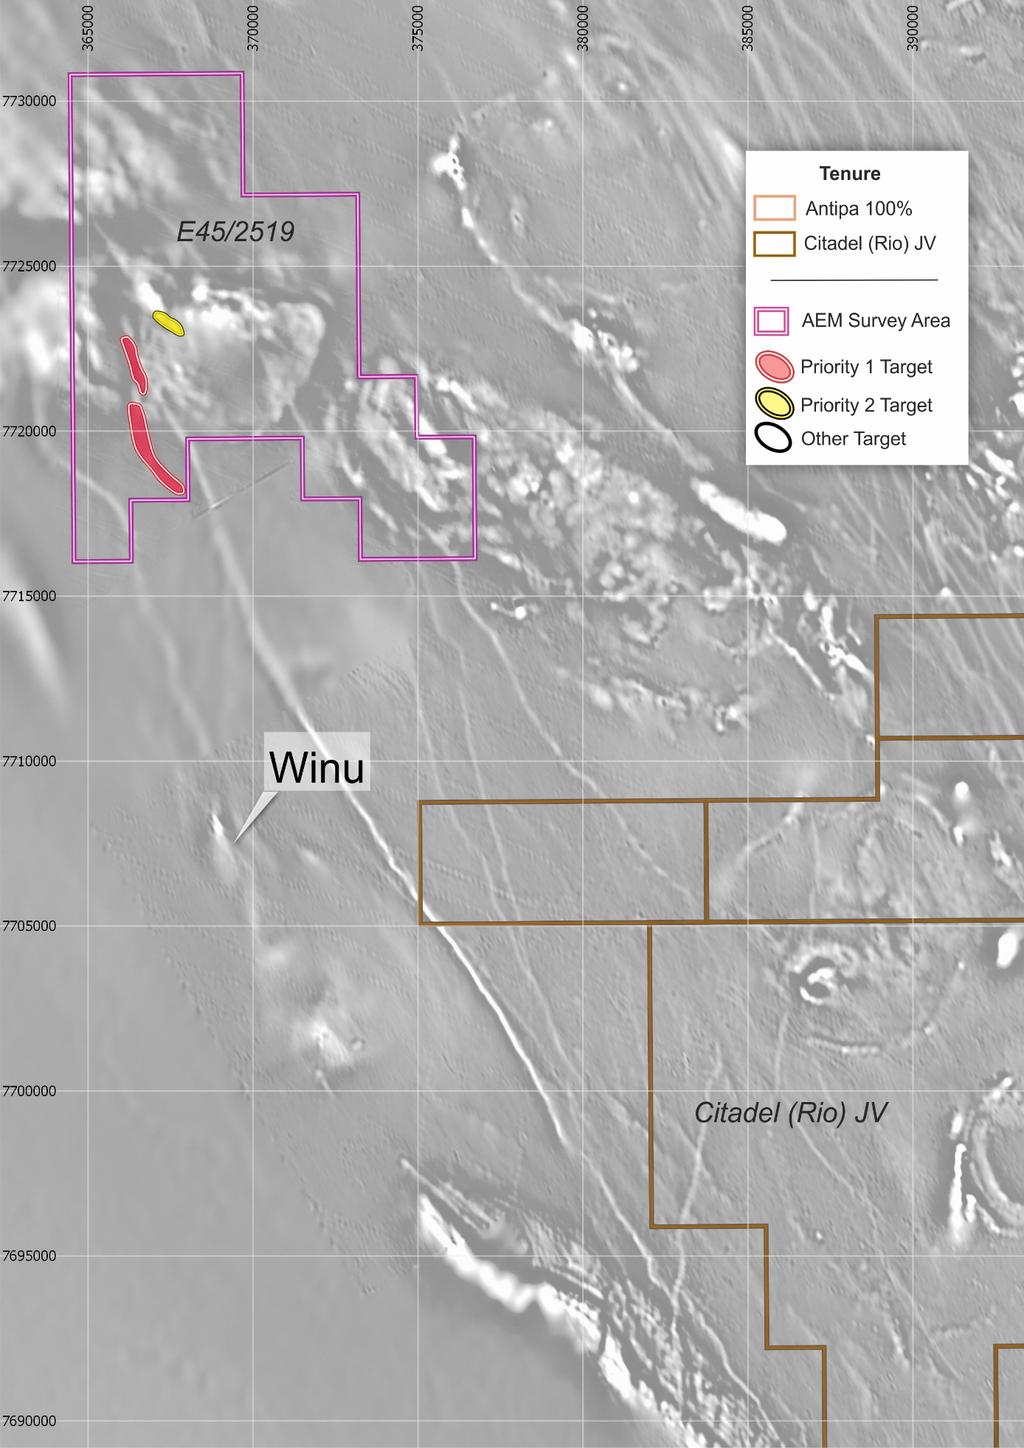 Figure 4c (Inset 3): Plan view showing northern portion of 2018 AEM survey area with deposit and prospect locations and ranked EM targets including target ID number (NB: Priority 1 and 2 AEM targets